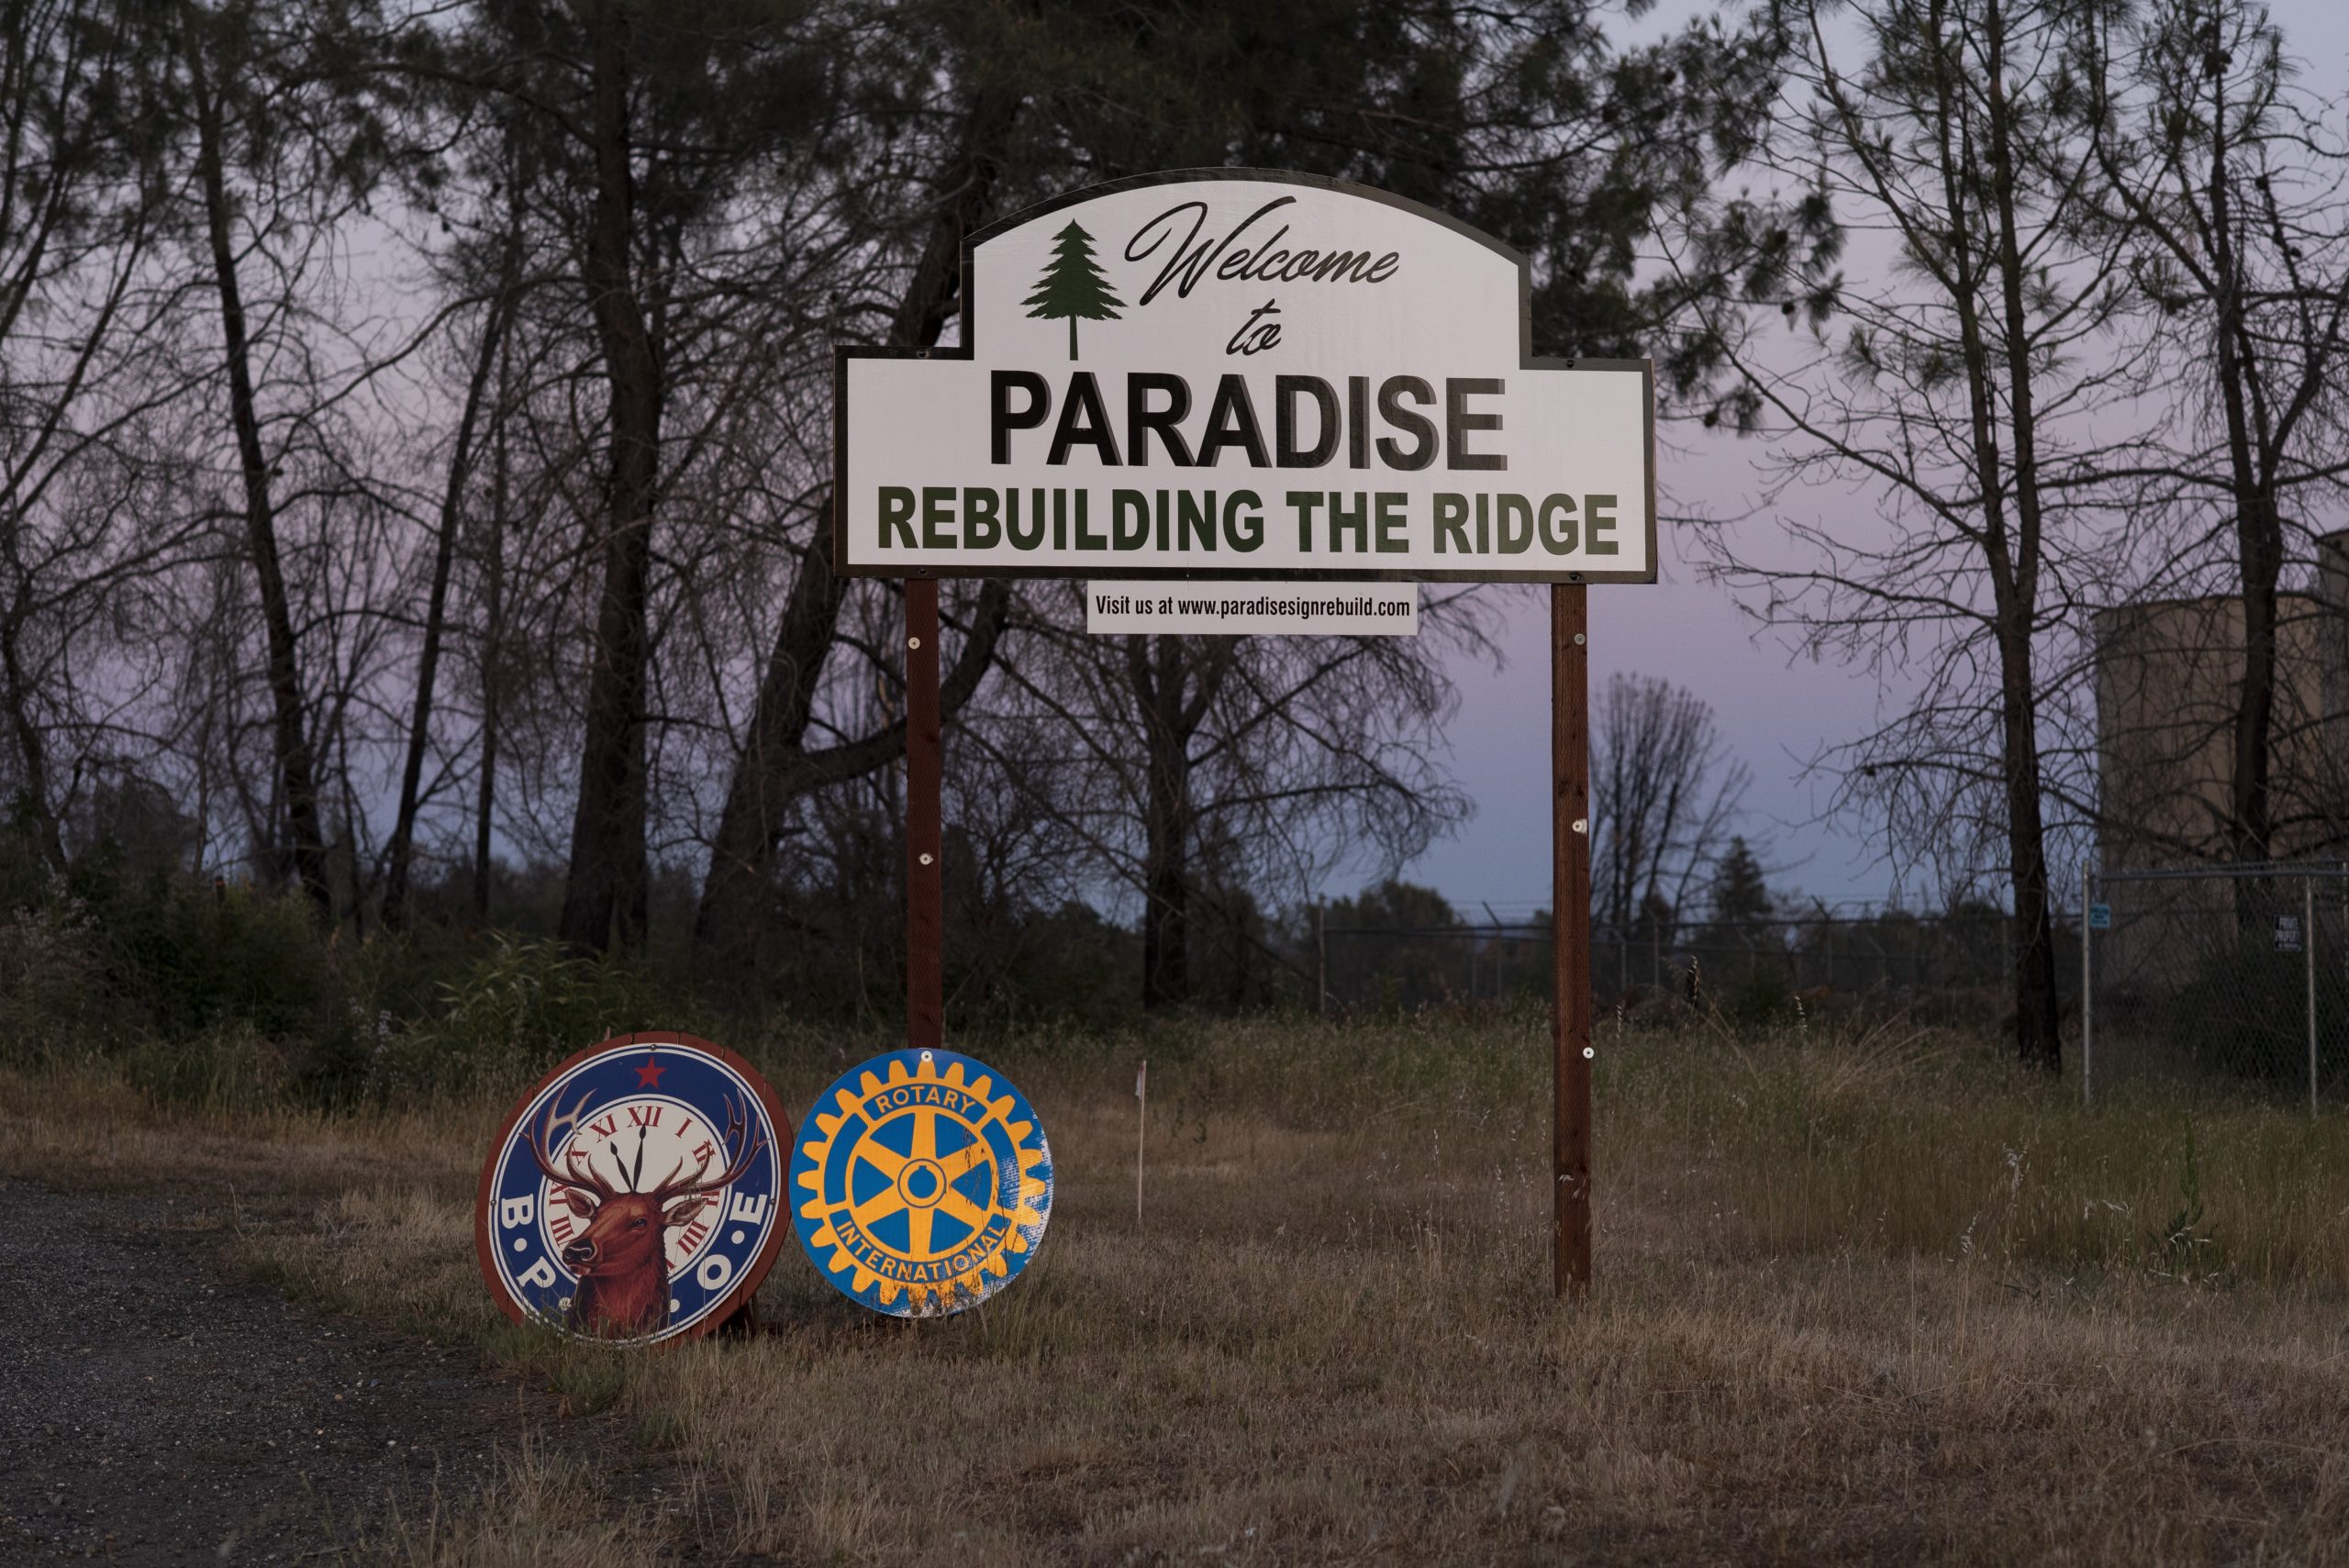 The Welcome to Paradise sign just outside Paradise, Calif. on Tuesday May 4, 2021. Salgu Wissmath for The Intercept